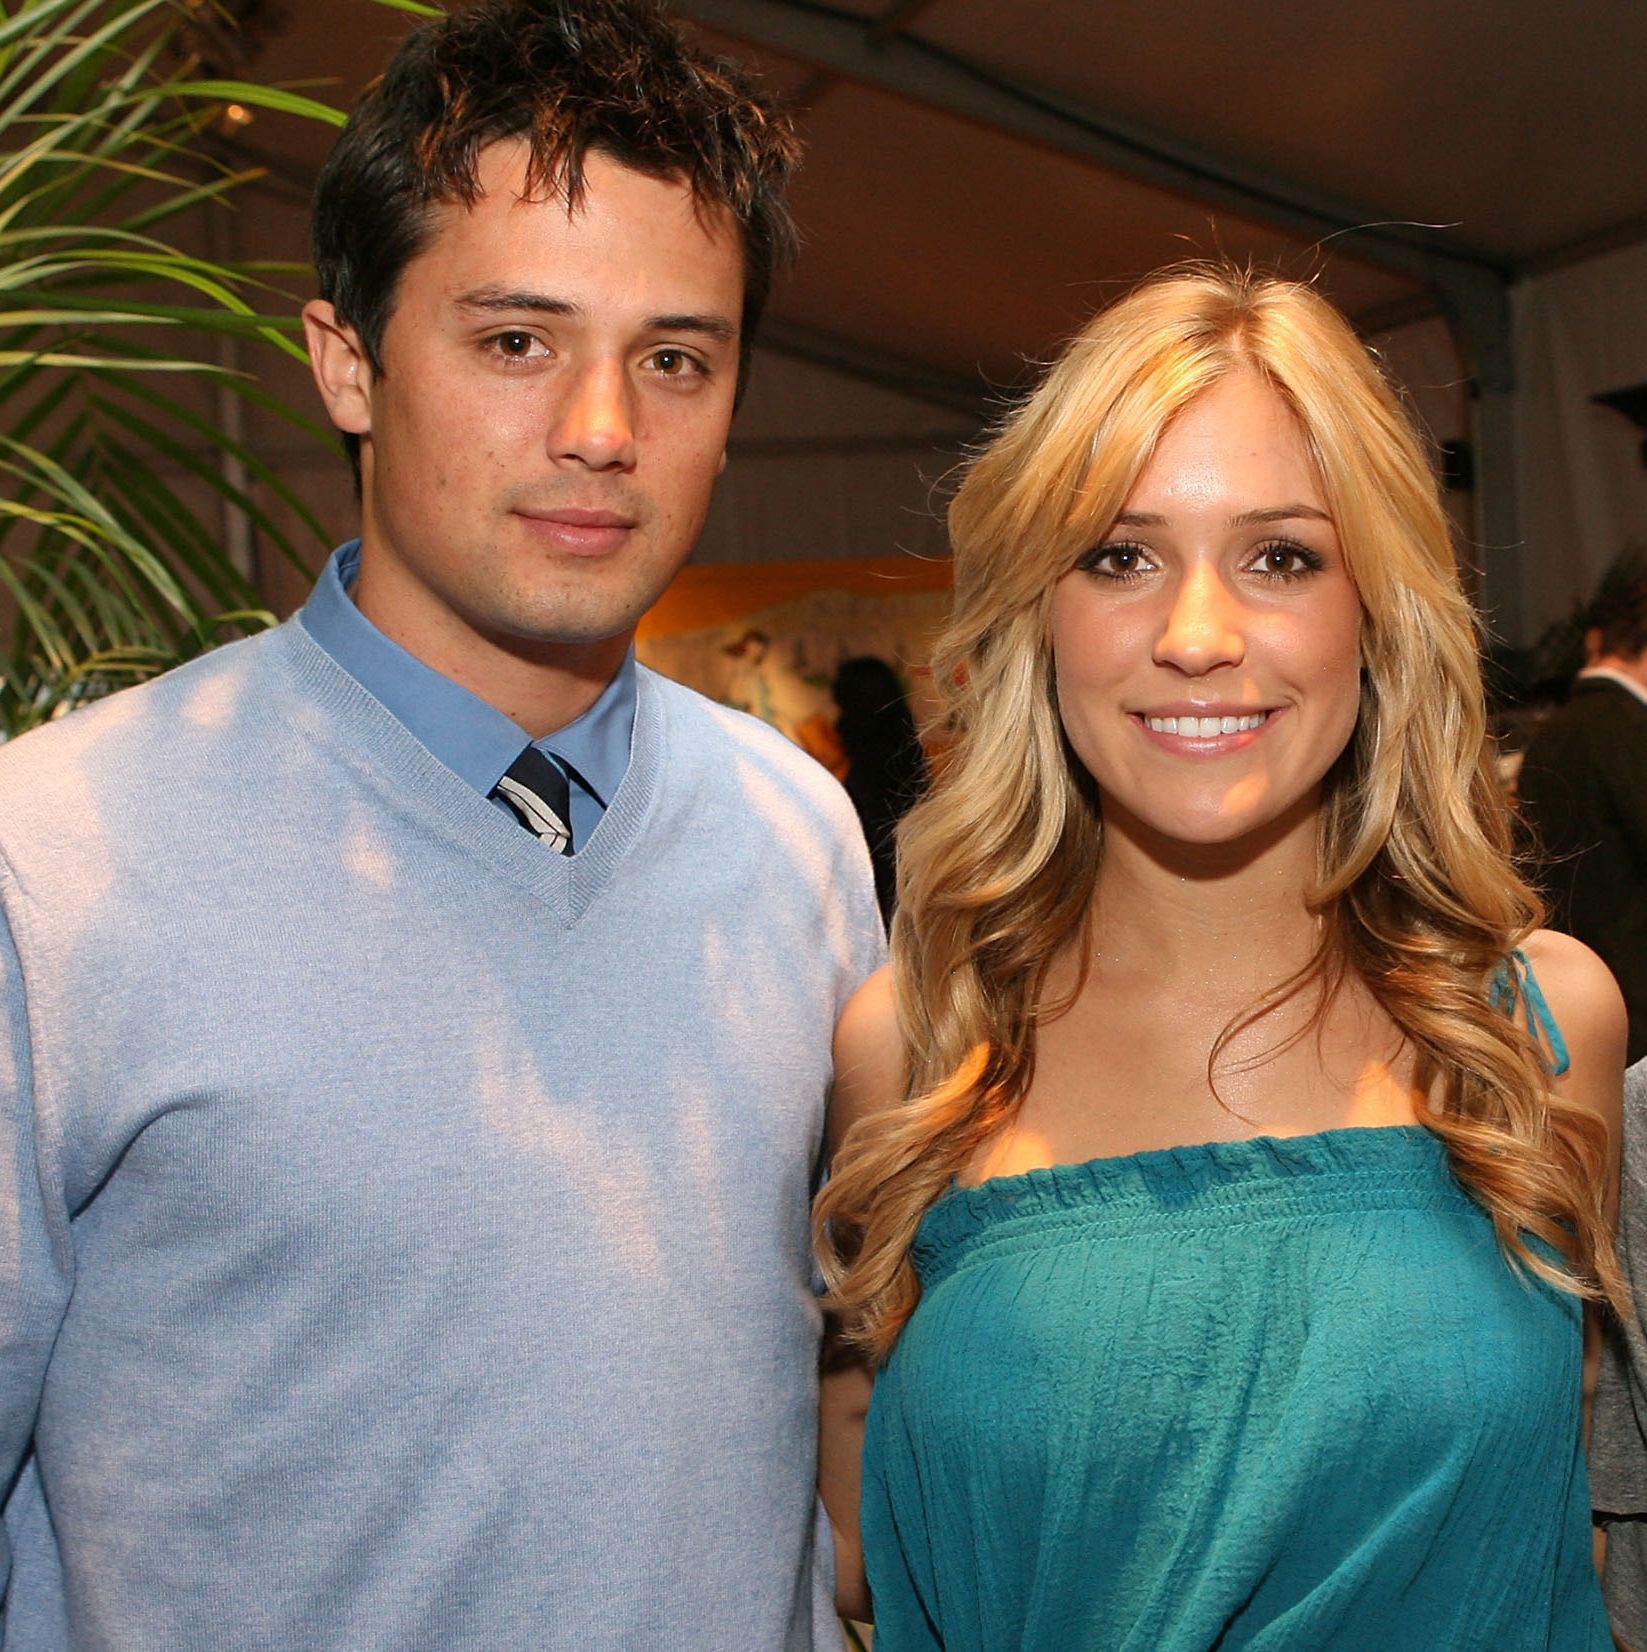 Kristin Cavallari and Stephen Colletti Dropped Their 'Laguna Beach' Earnings and They're Shocking